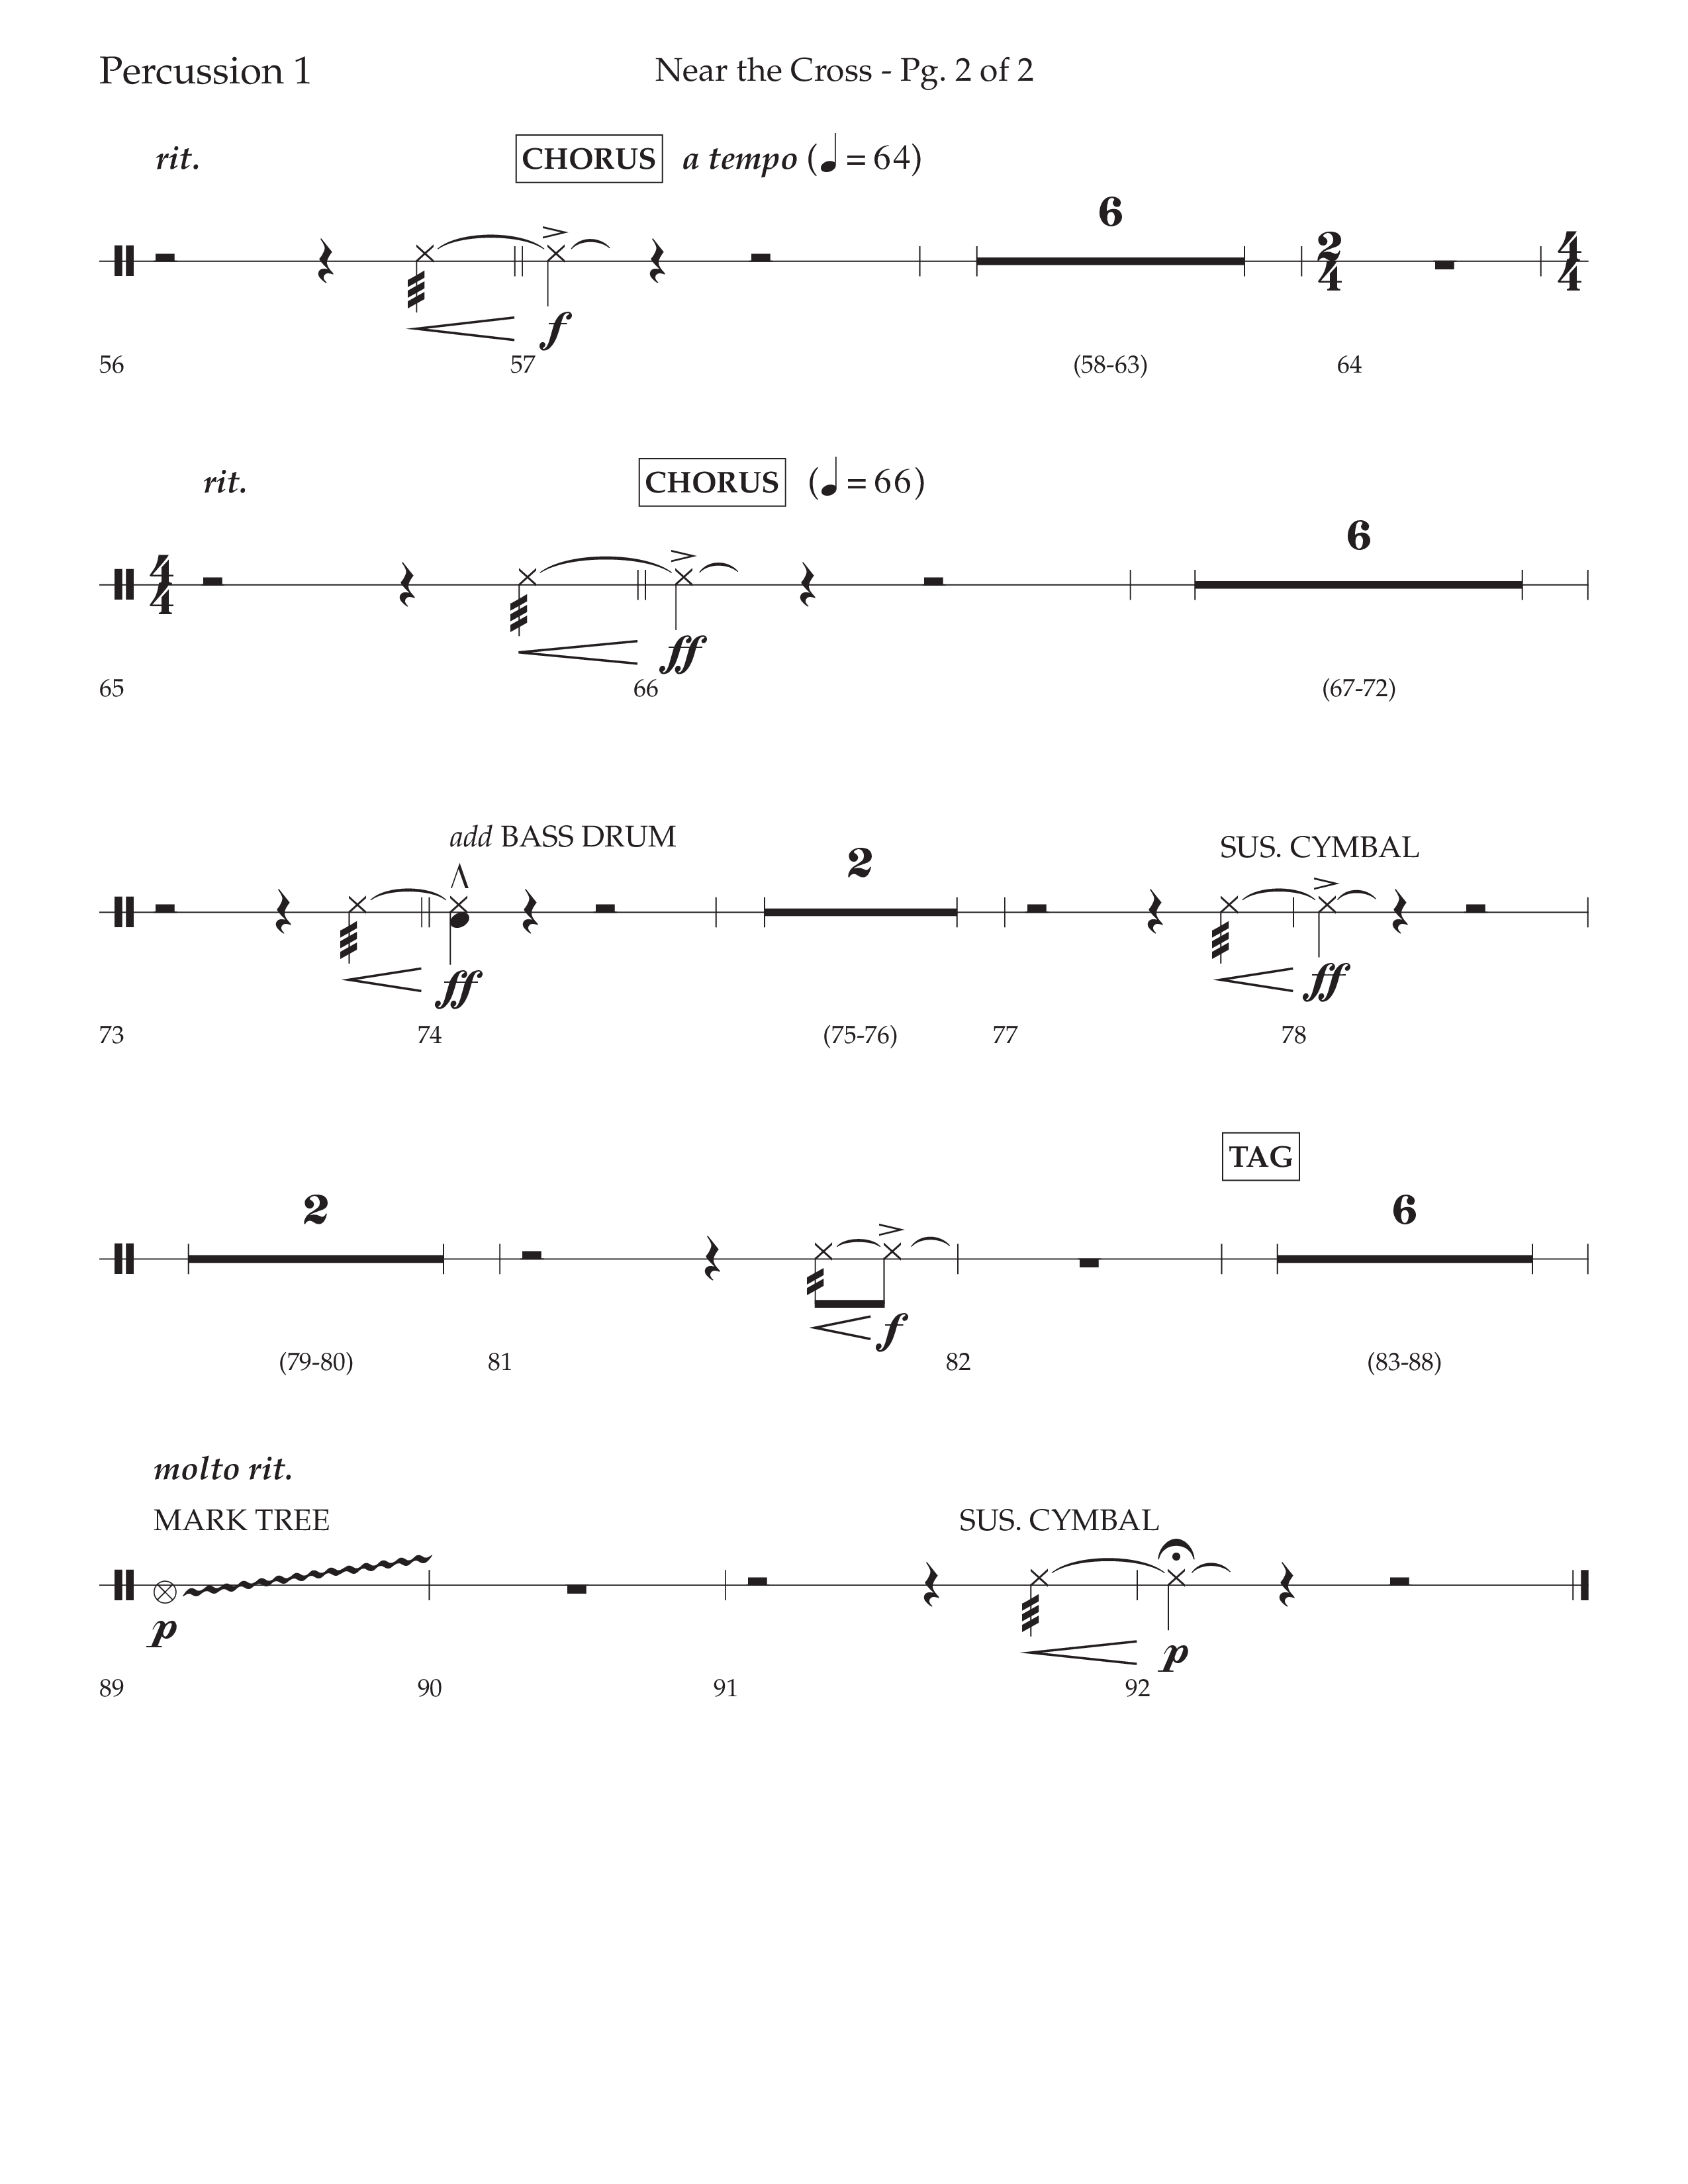 Near The Cross (Choral Anthem SATB) Percussion 1/2 (Lifeway Choral / Arr. David Wise / Orch. Cliff Duren)